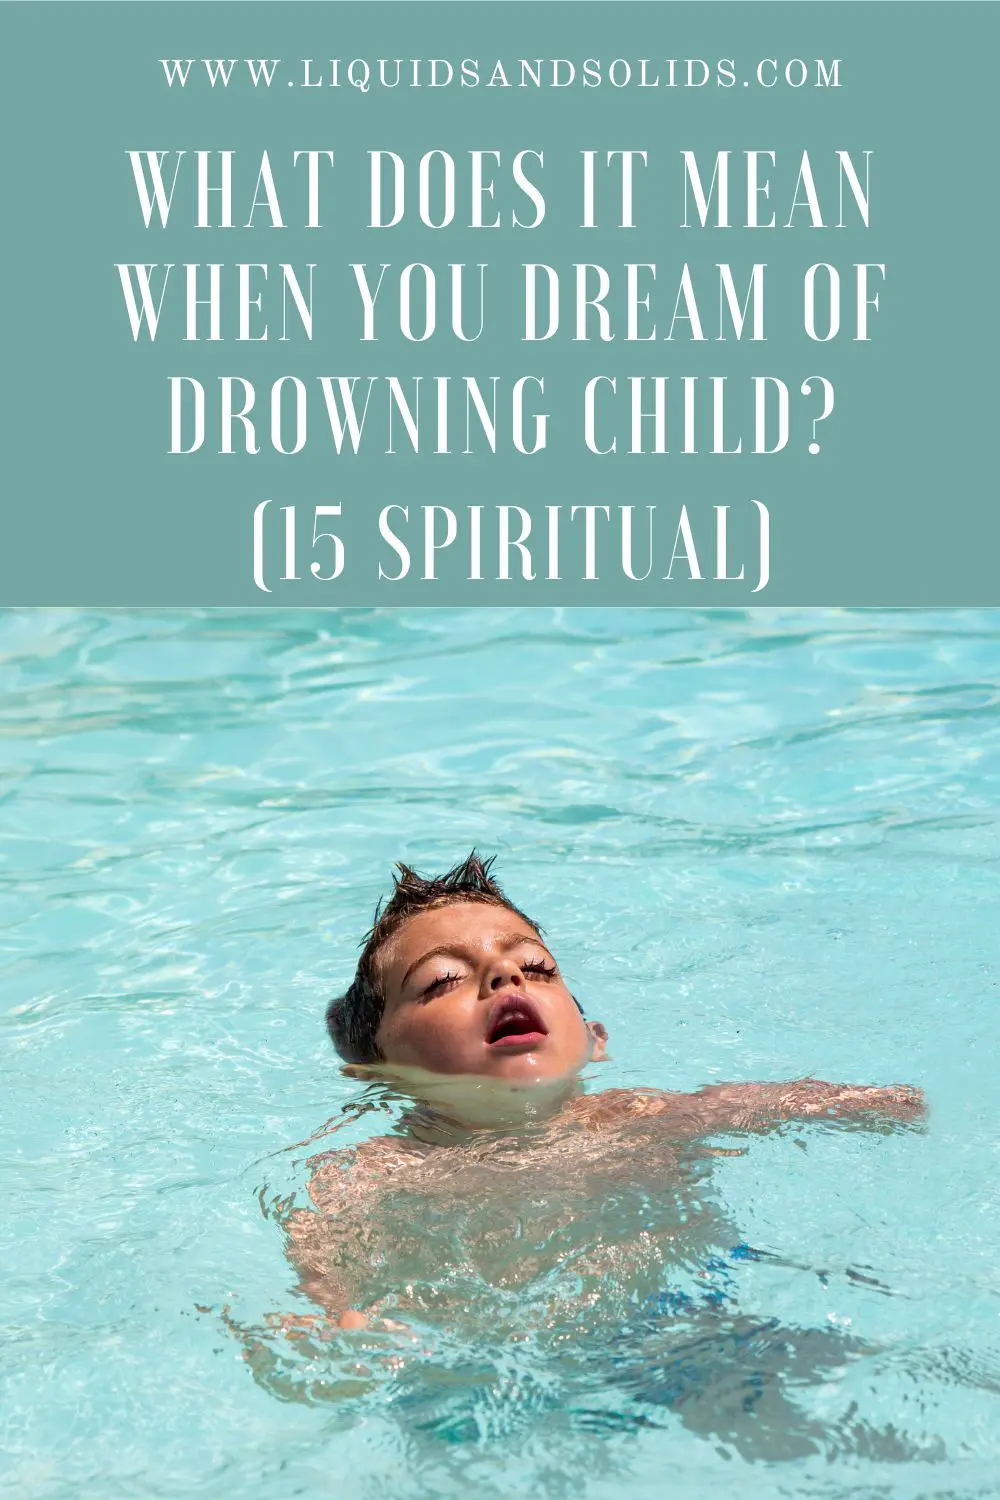 What Dreams Of Child Falling Into Water Mean